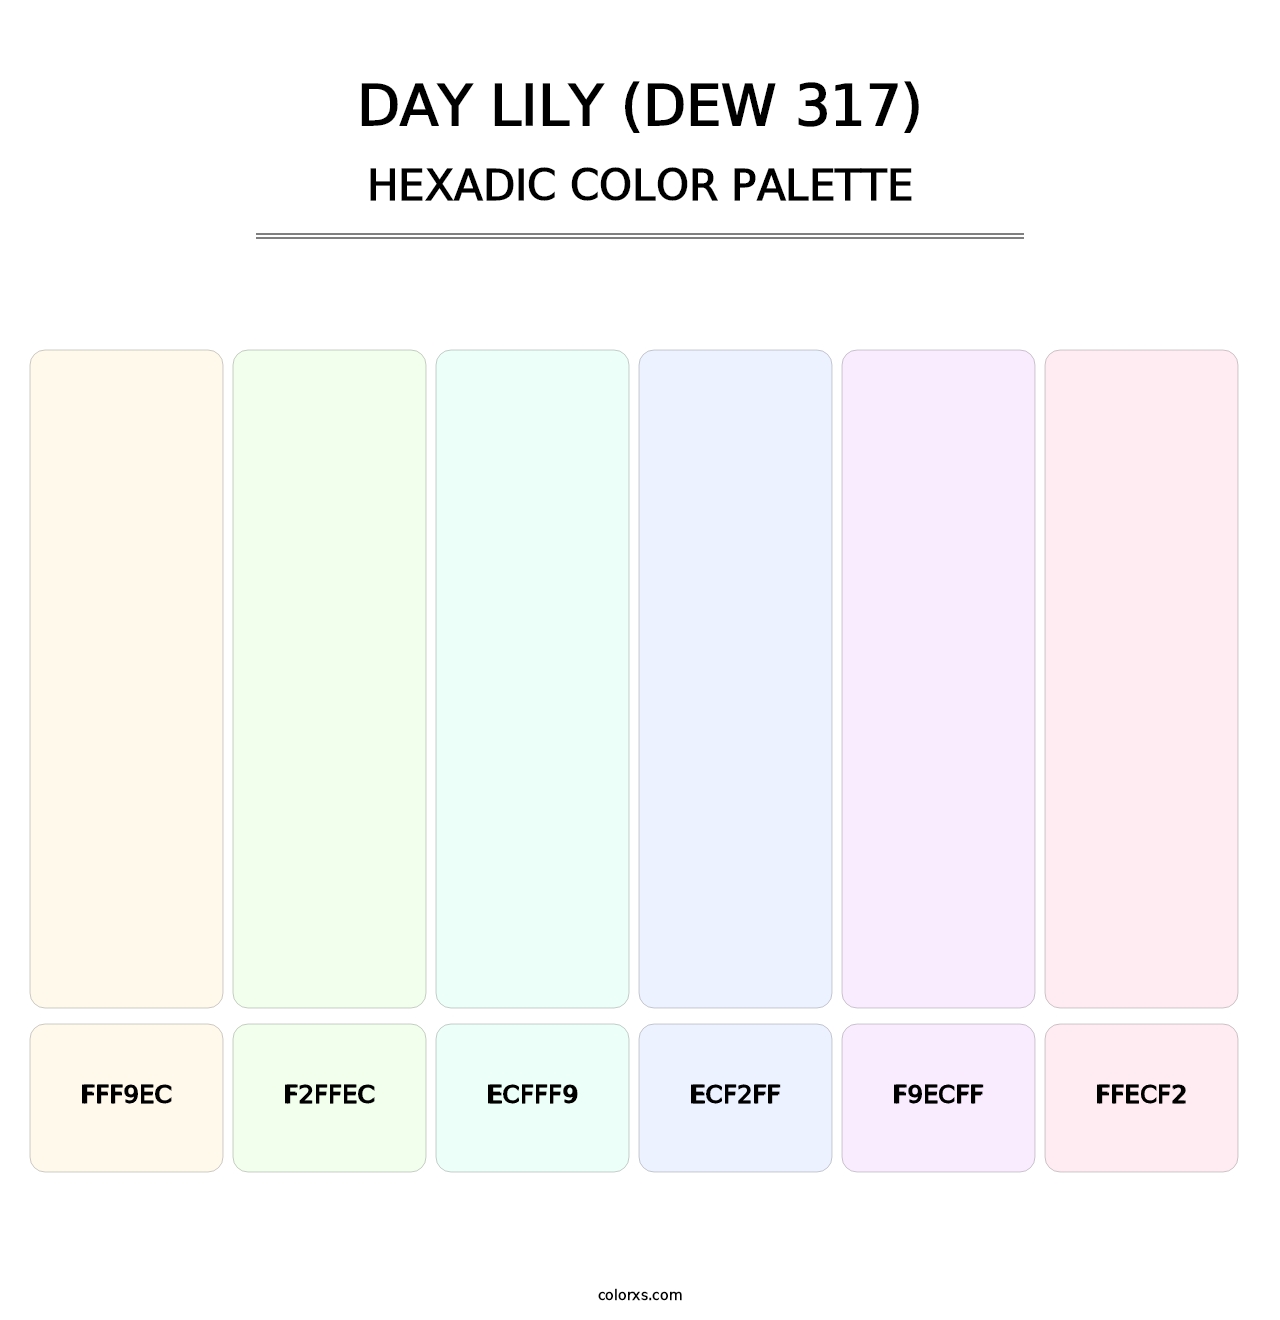 Day Lily (DEW 317) - Hexadic Color Palette